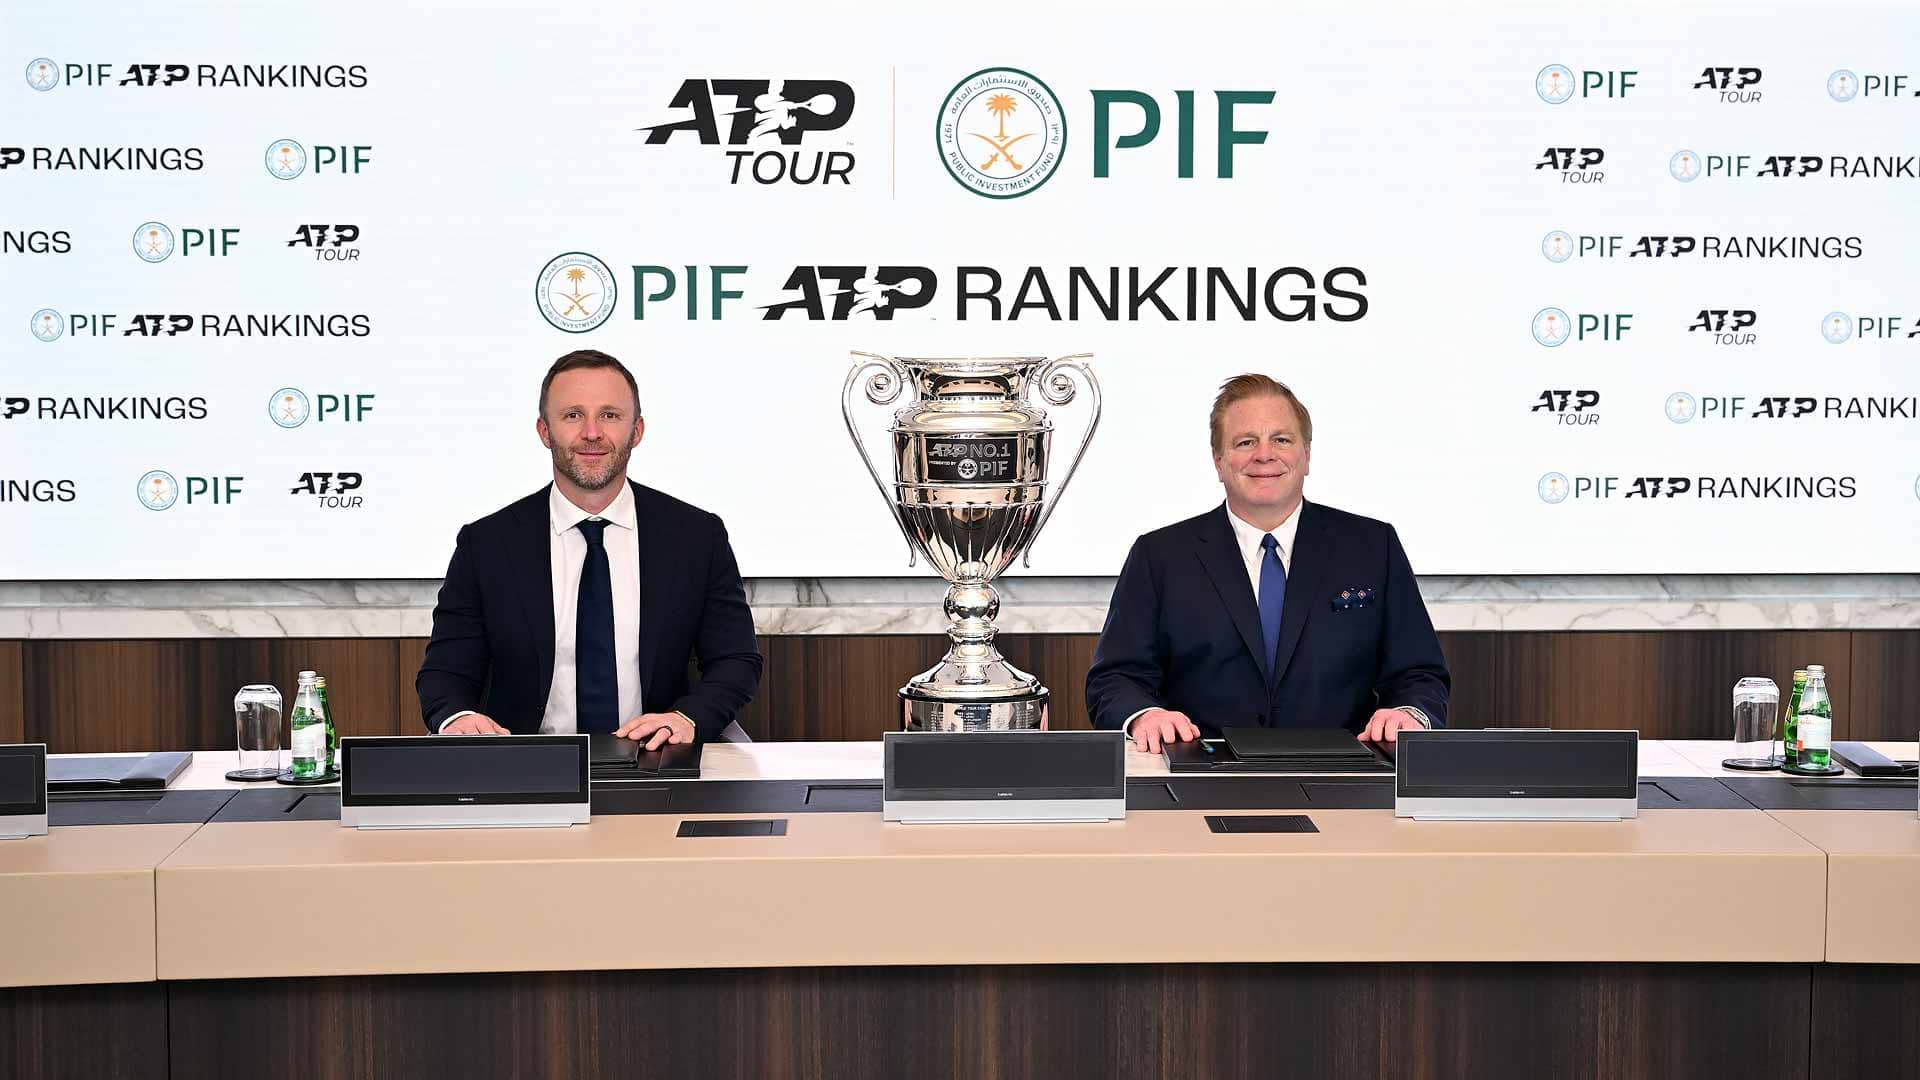 ATP CEO Massimo Calvelli (left) sits alongside Kevin Foster, PIF Head of Corporate Affairs